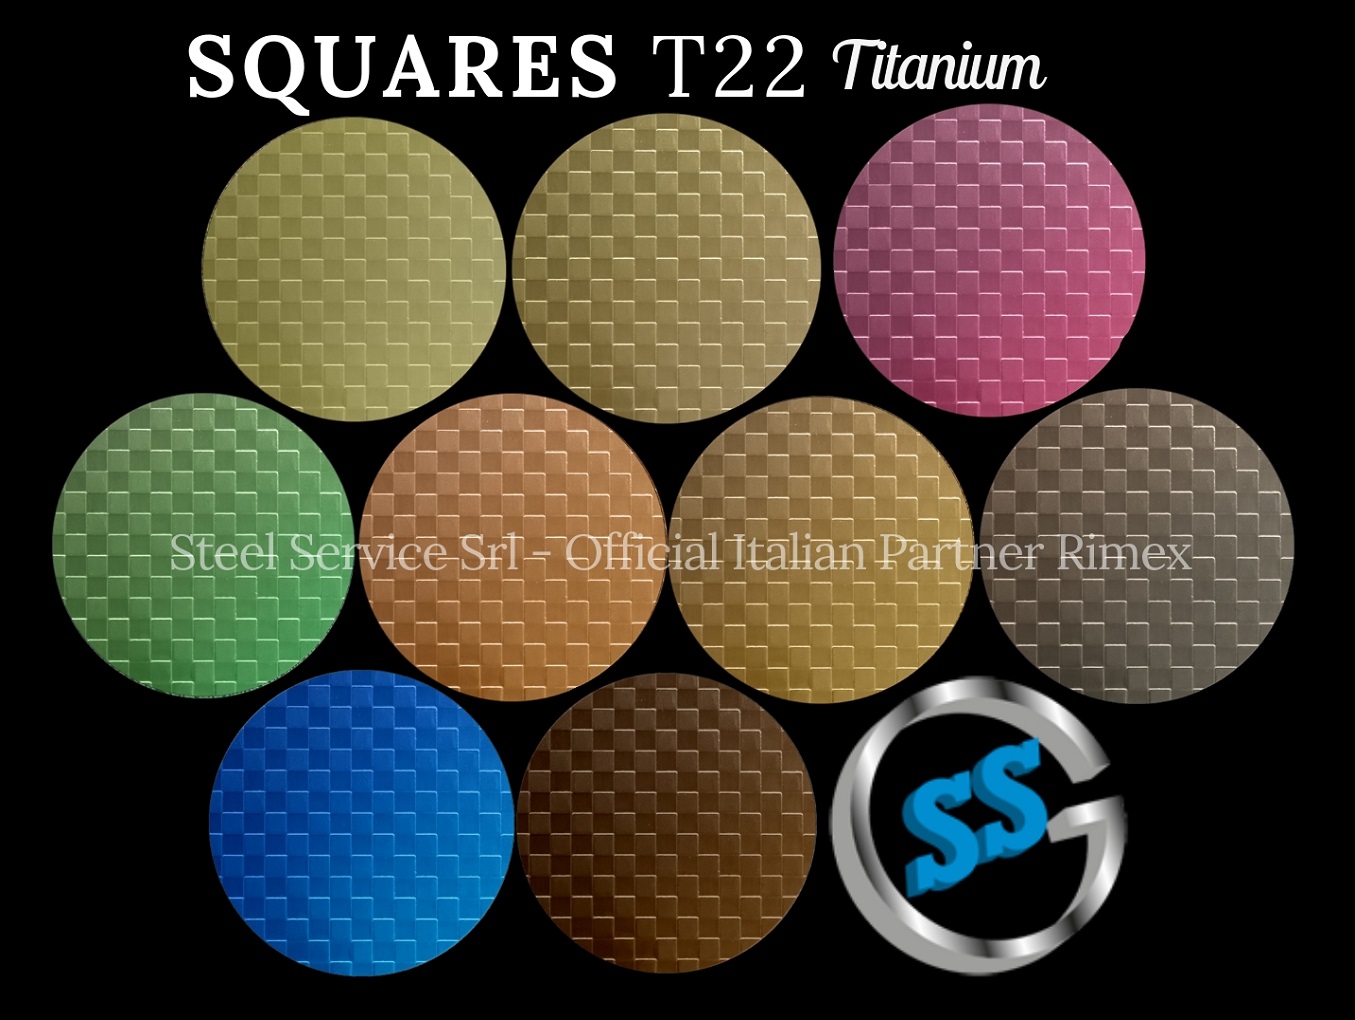 SQUARES T22 gallery 4